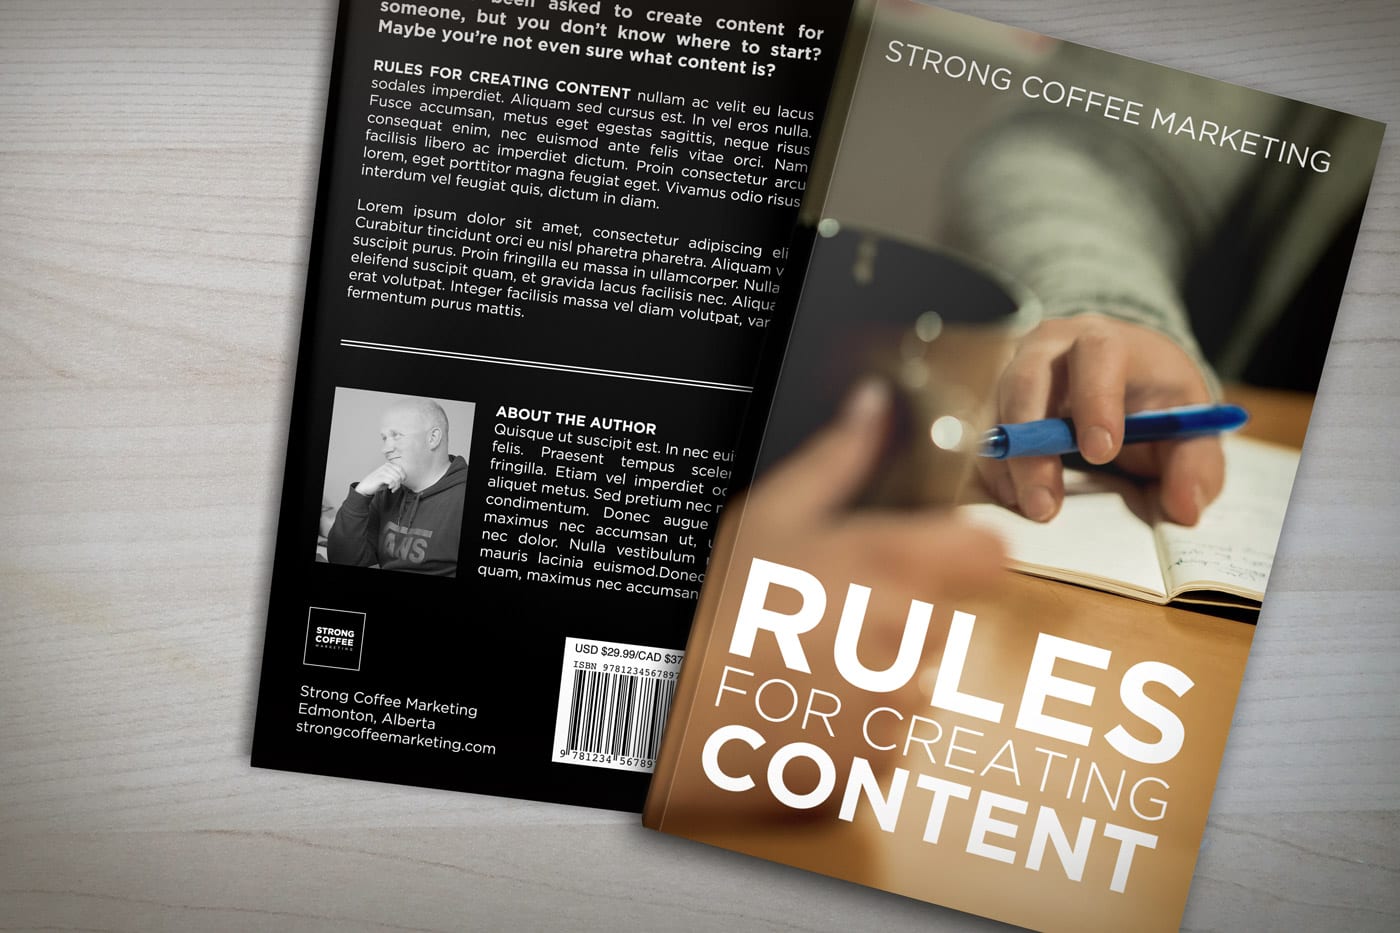 Rules for creating compelling content